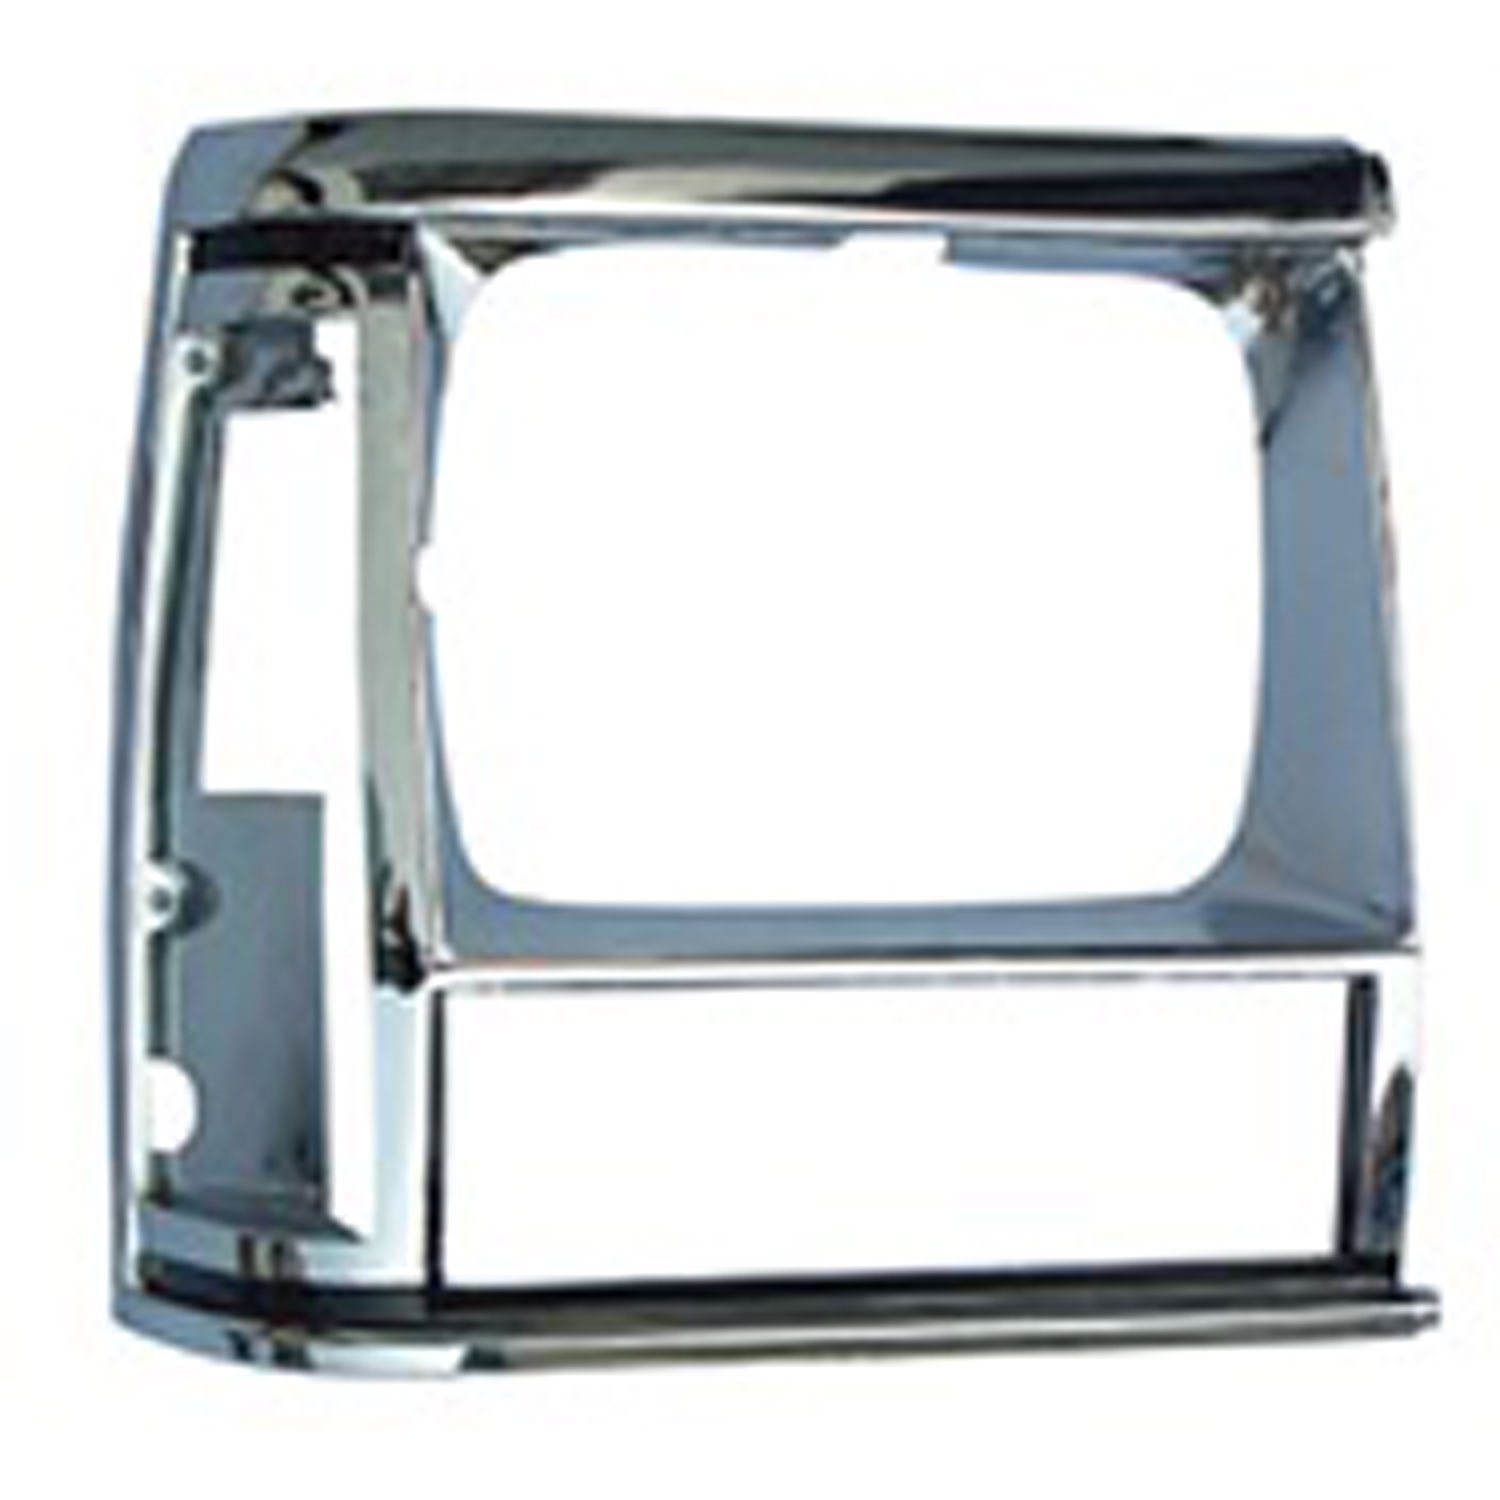 This chrome headlight bezel from Omix-ADA fits the